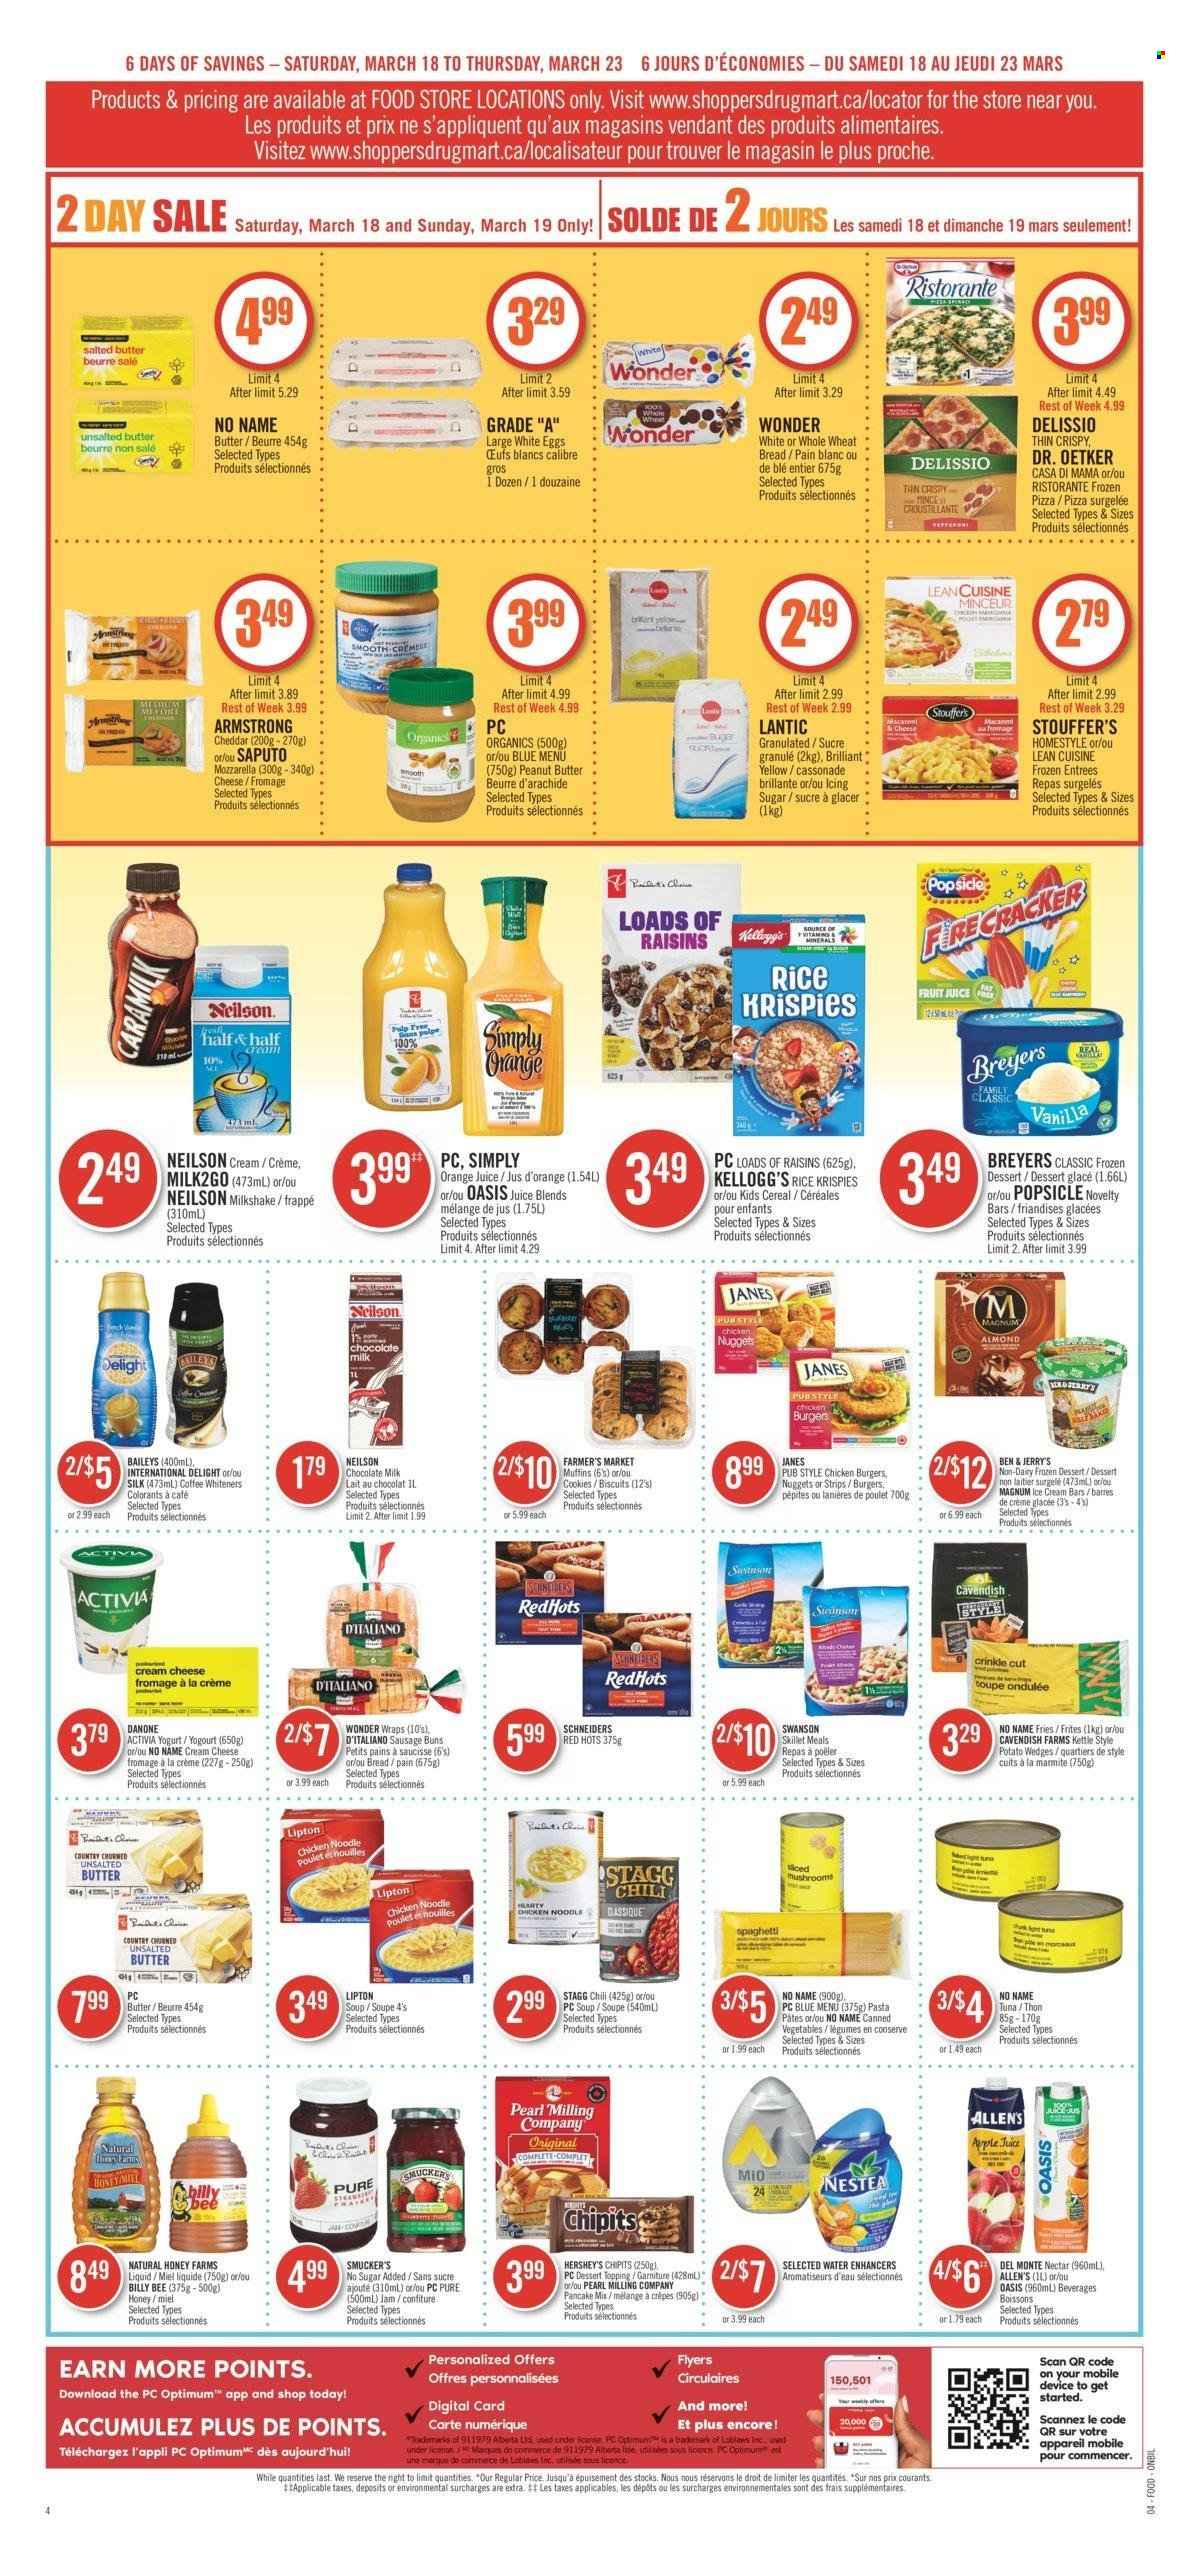 thumbnail - Shoppers Drug Mart Flyer - March 18, 2023 - March 23, 2023 - Sales products - wheat bread, buns, wraps, tuna, No Name, spaghetti, pizza, soup, nuggets, hamburger, pasta, pancakes, chicken nuggets, noodles, Lean Cuisine, cream cheese, cheddar, Dr. Oetker, yoghurt, Activia, milkshake, Silk, eggs, salted butter, coffee whitener, Magnum, ice cream, ice cream bars, Hershey's, Ben & Jerry's, Stouffer's, cookies, milk chocolate, Mars, muffin, Kellogg's, biscuit, topping, icing sugar, Del Monte, cereals, Rice Krispies, honey, fruit jam, peanut butter, Baileys, dried fruit, apple juice, orange juice, juice, water, coffee, Optimum, Half and half, Canon, raisins, Danone, Lipton. Page 3.